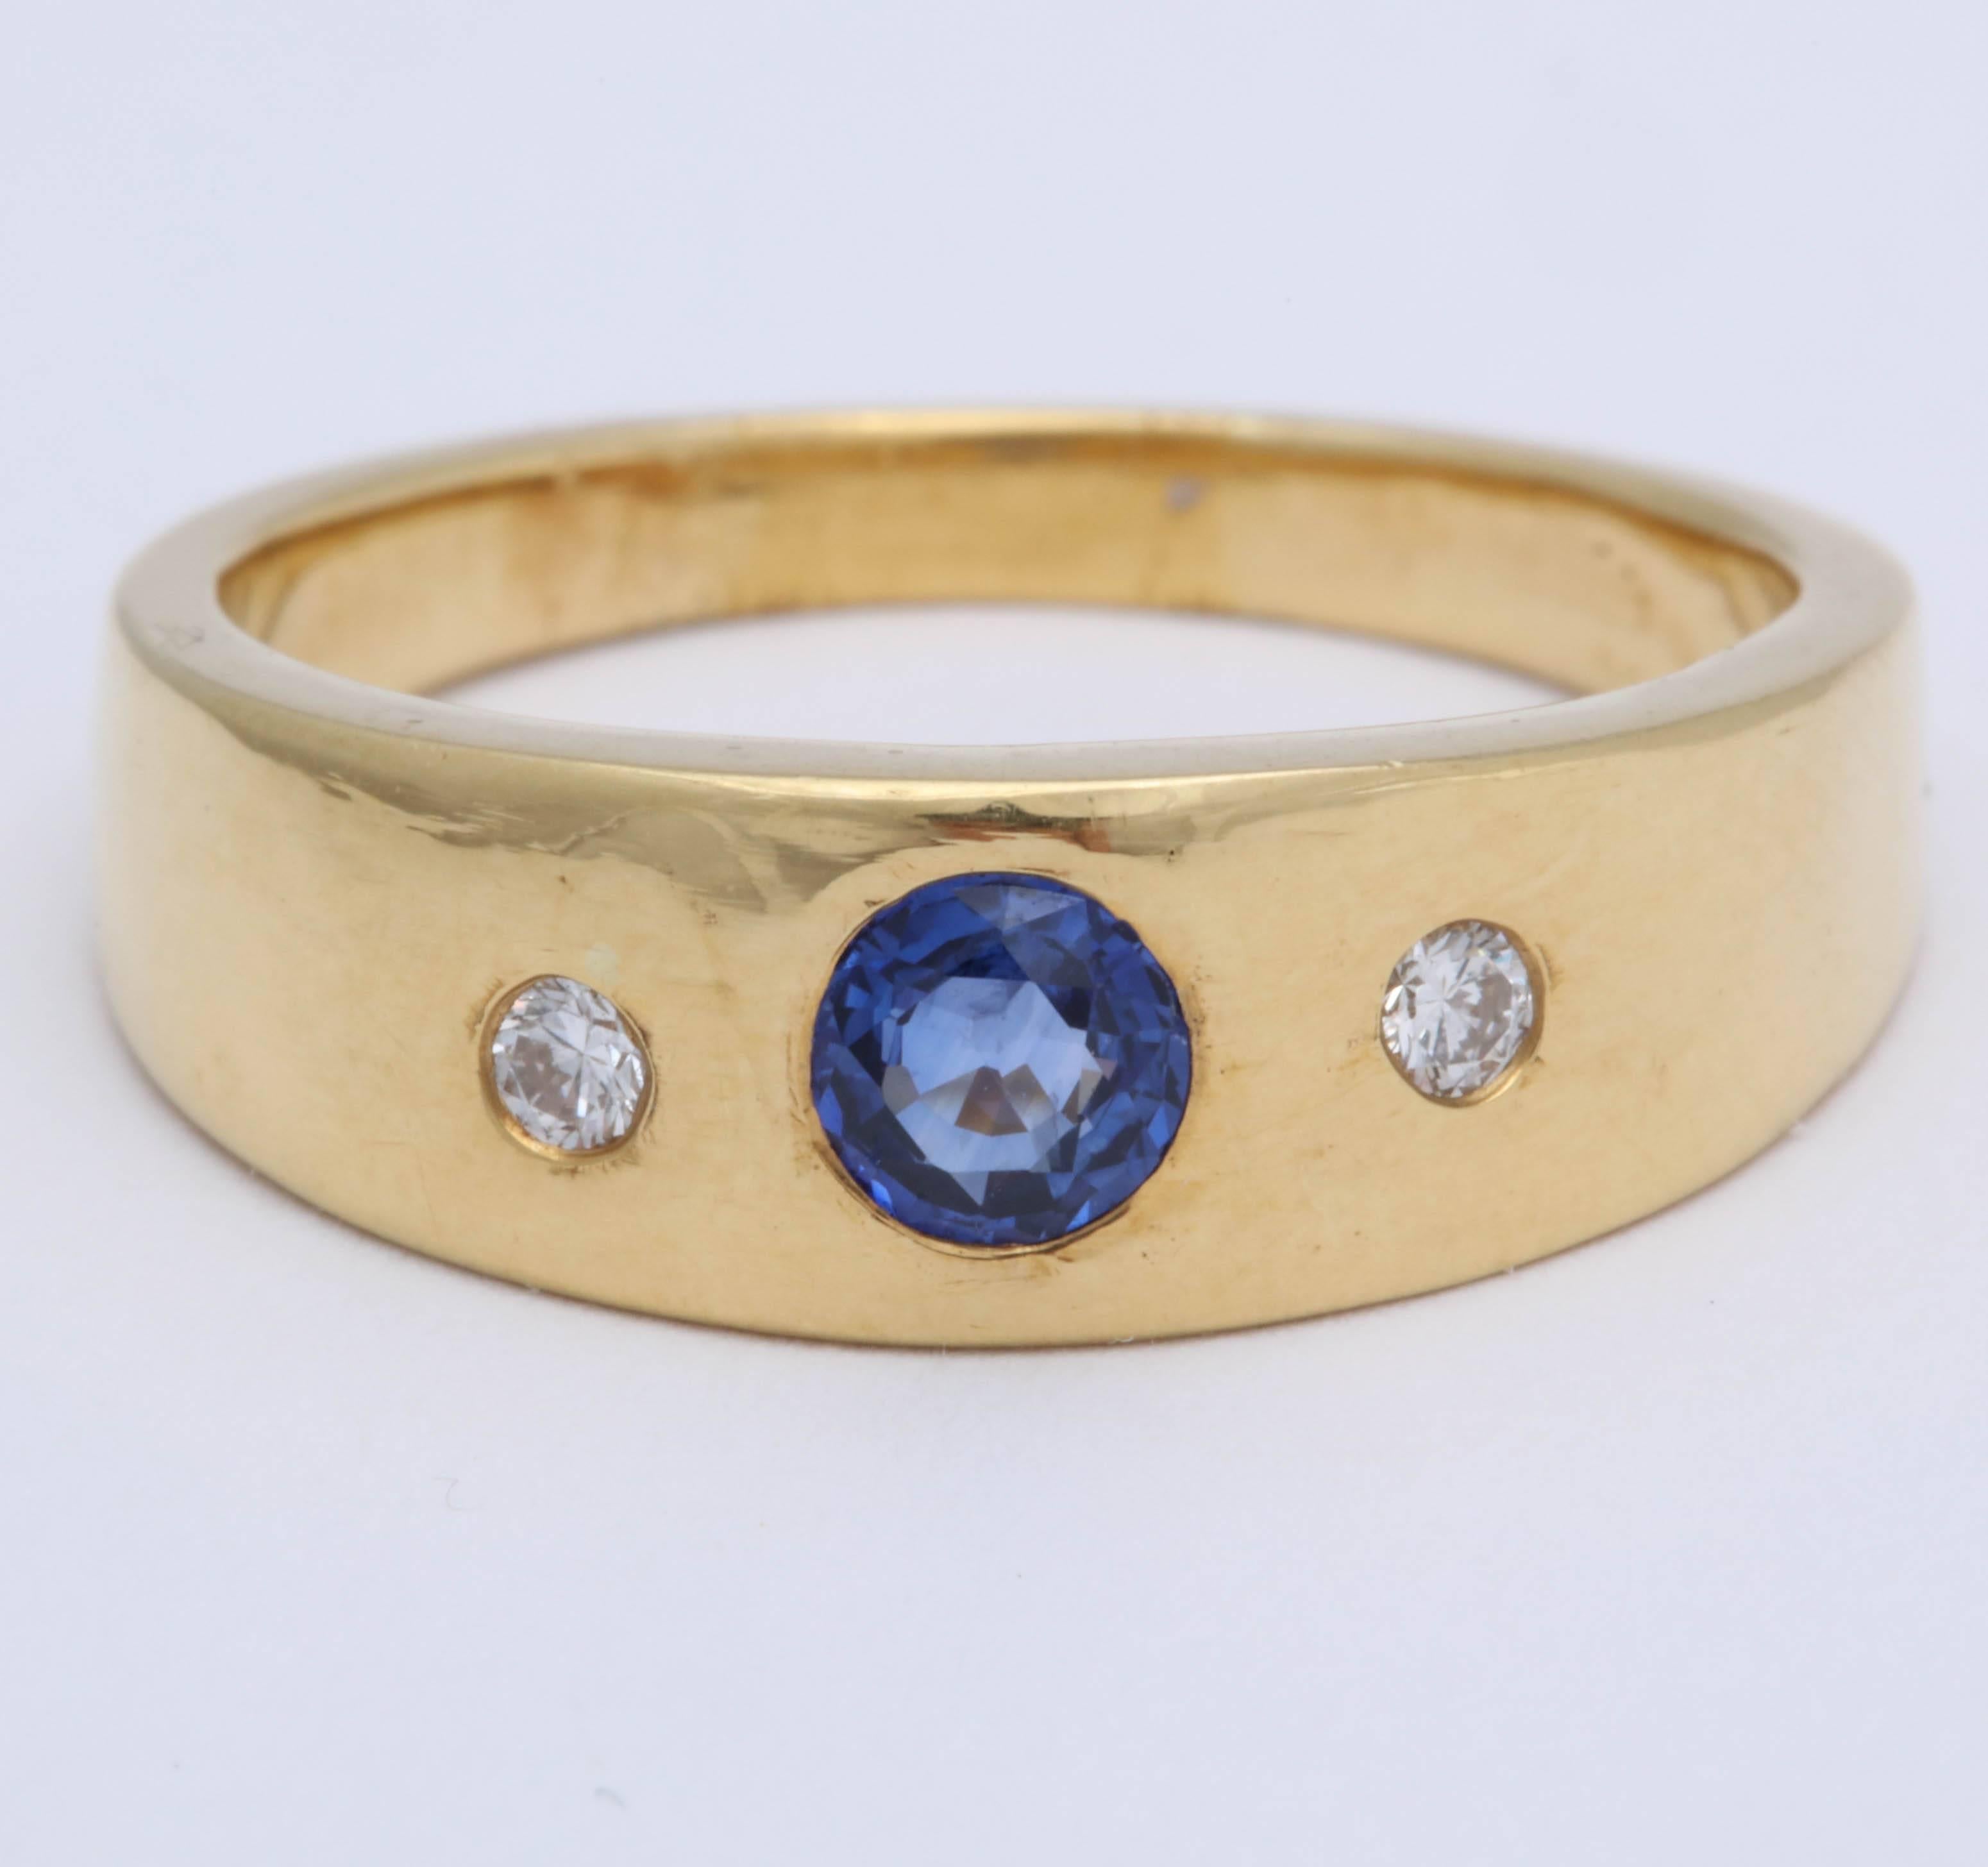 This 18 Kt ring can be used as a wedding band or a stacking ring. The blue sapphire  is about .85 cts., and a slightly oval faceted stone that is 